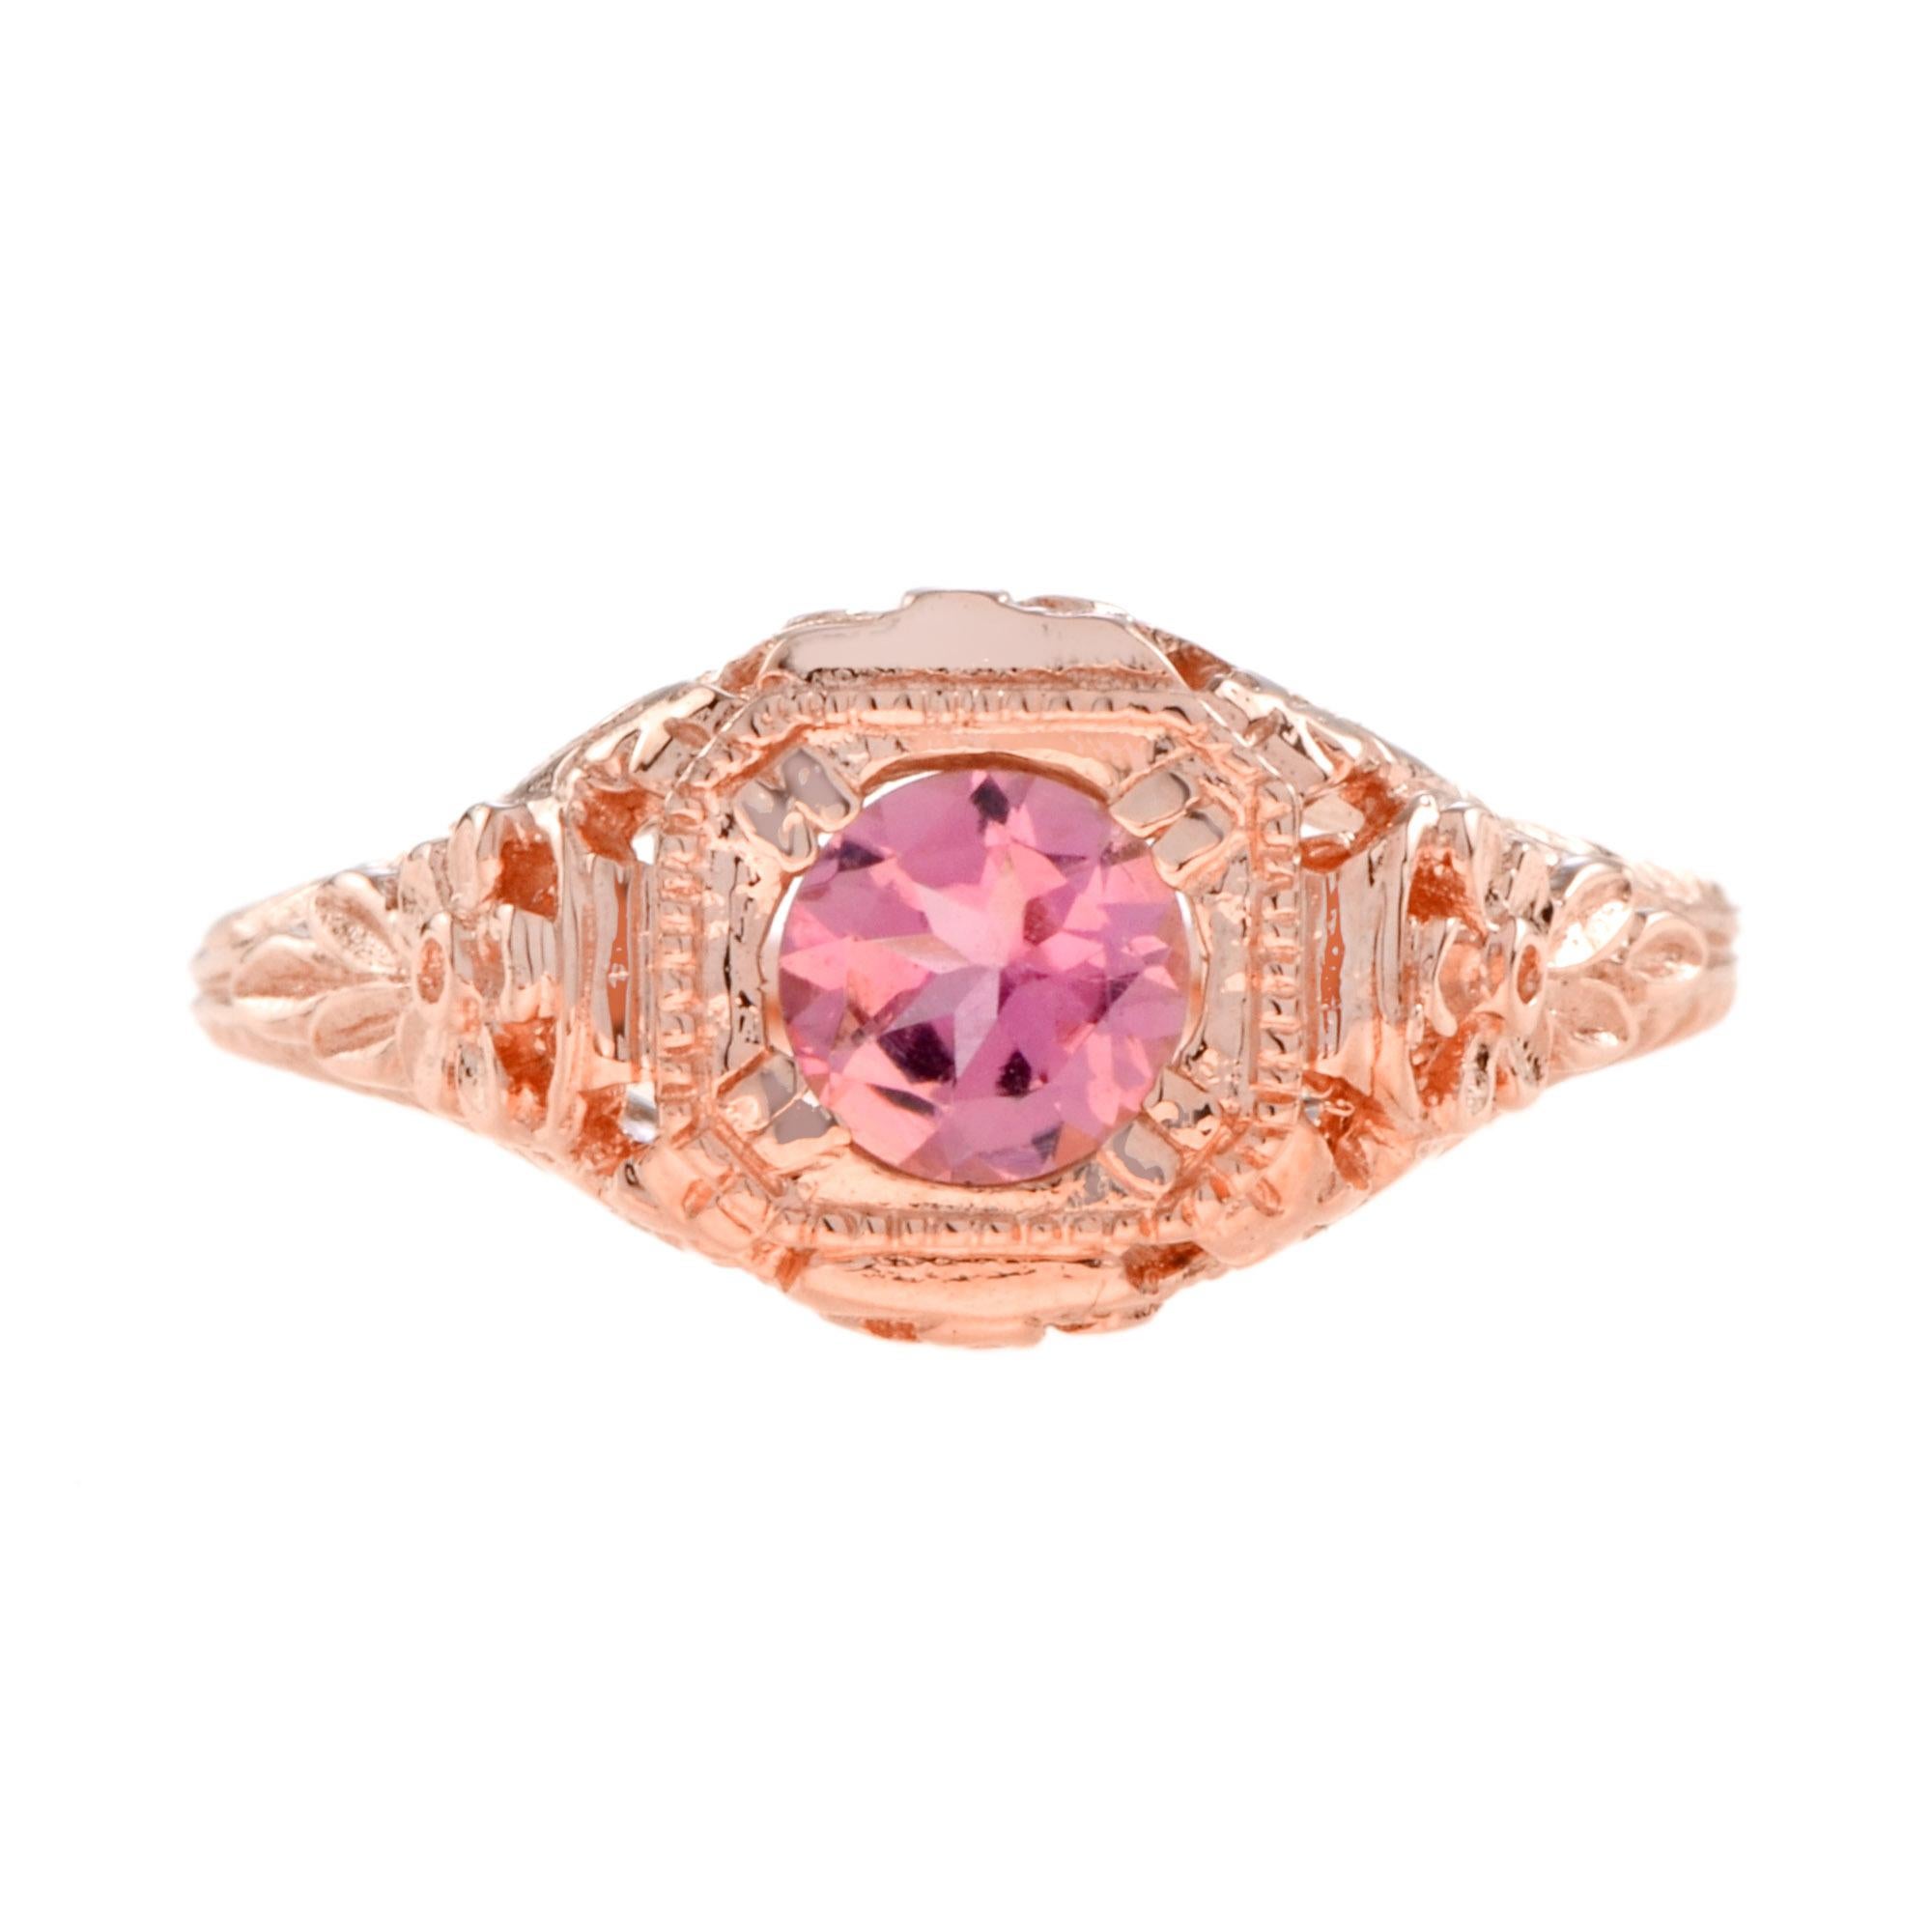 This unique 14K rose gold Art Deco style pink tourmaline filigree engagement ring is crafted in a beautiful antique nature themed engraved filigree design. The natural pink tourmaline of 0.43 carat at the center is set into a secure setting.  

Ring